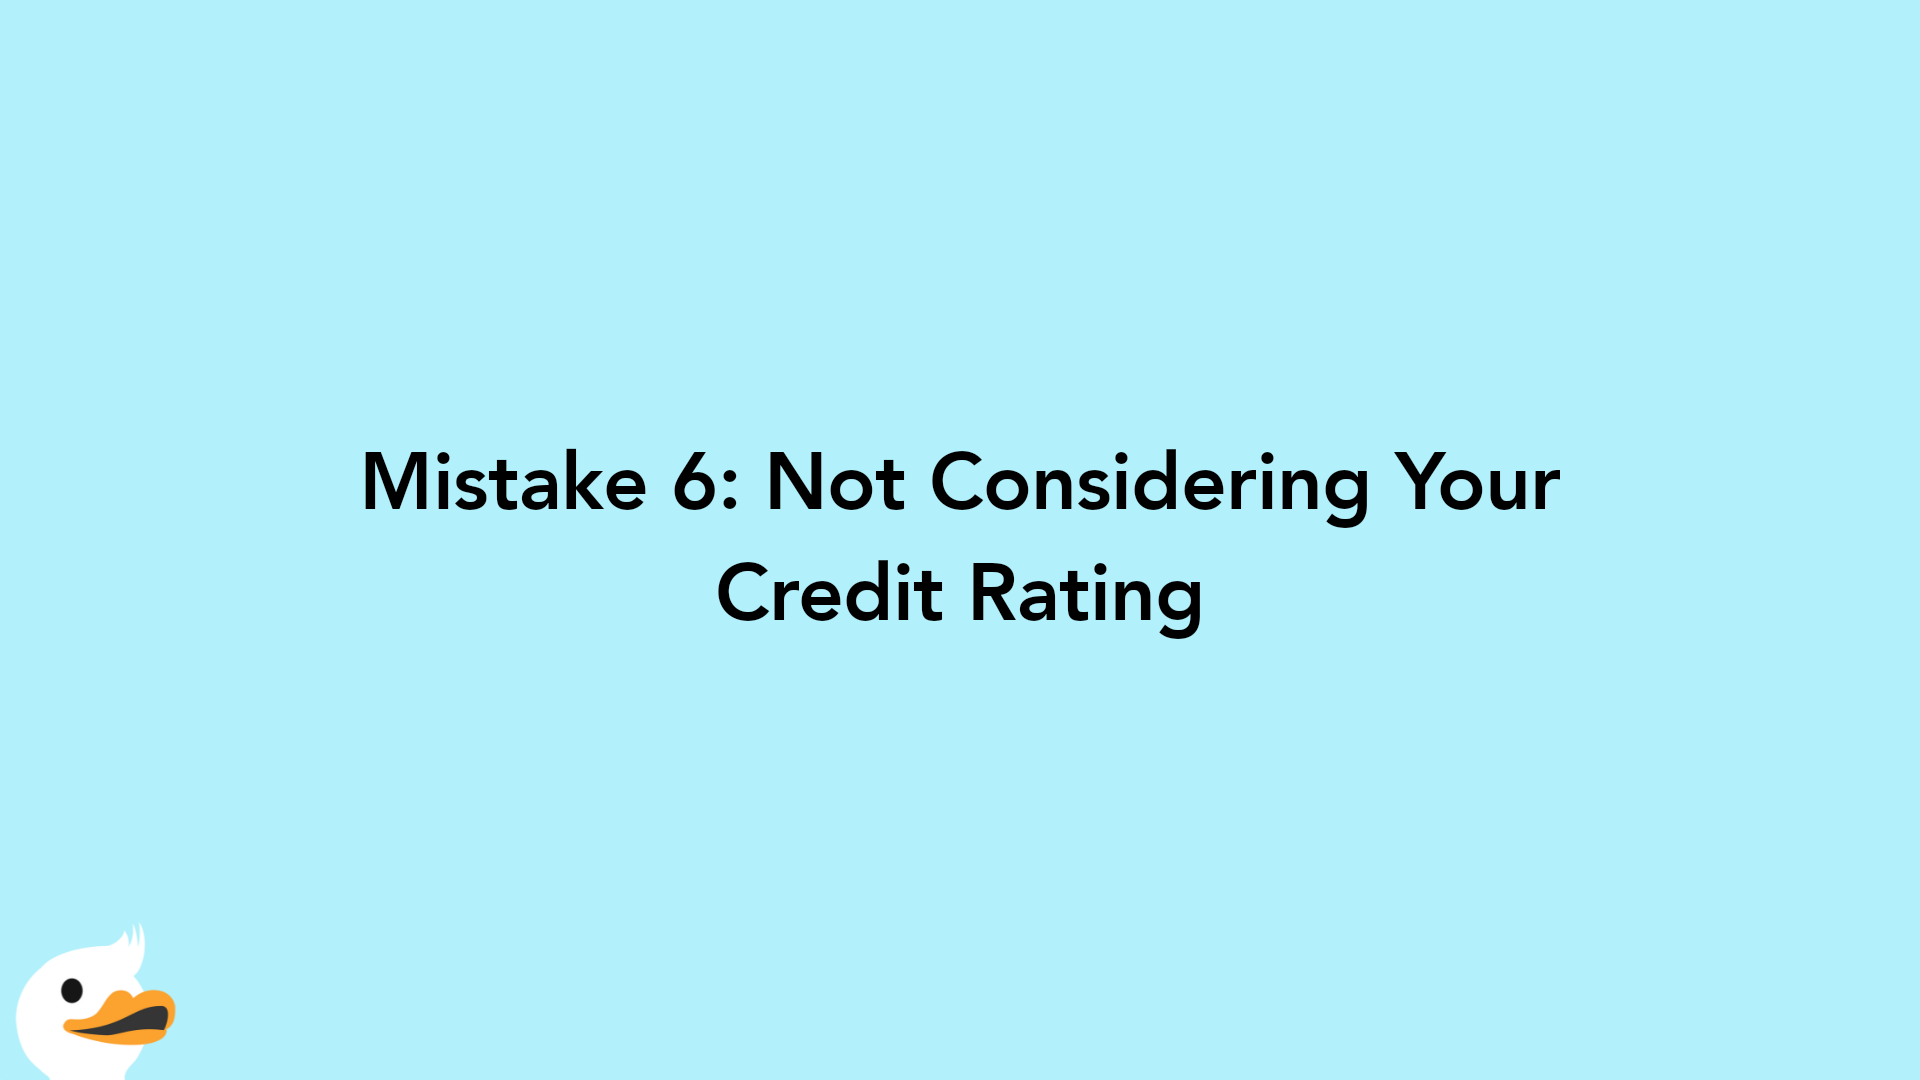 Mistake 6: Not Considering Your Credit Rating